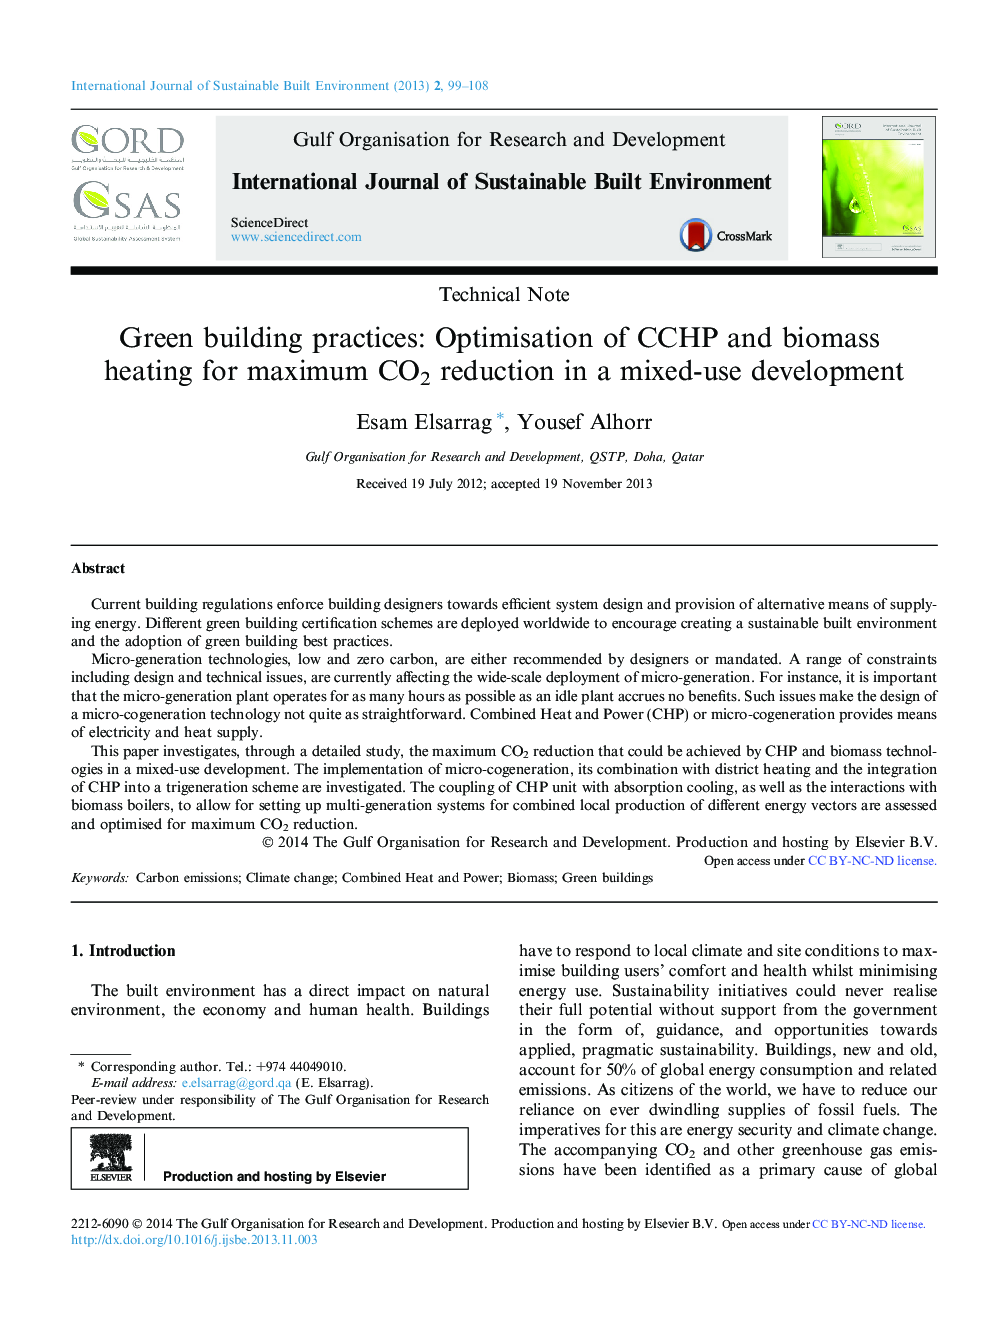 Green building practices: Optimisation of CCHP and biomass heating for maximum CO2 reduction in a mixed-use development 